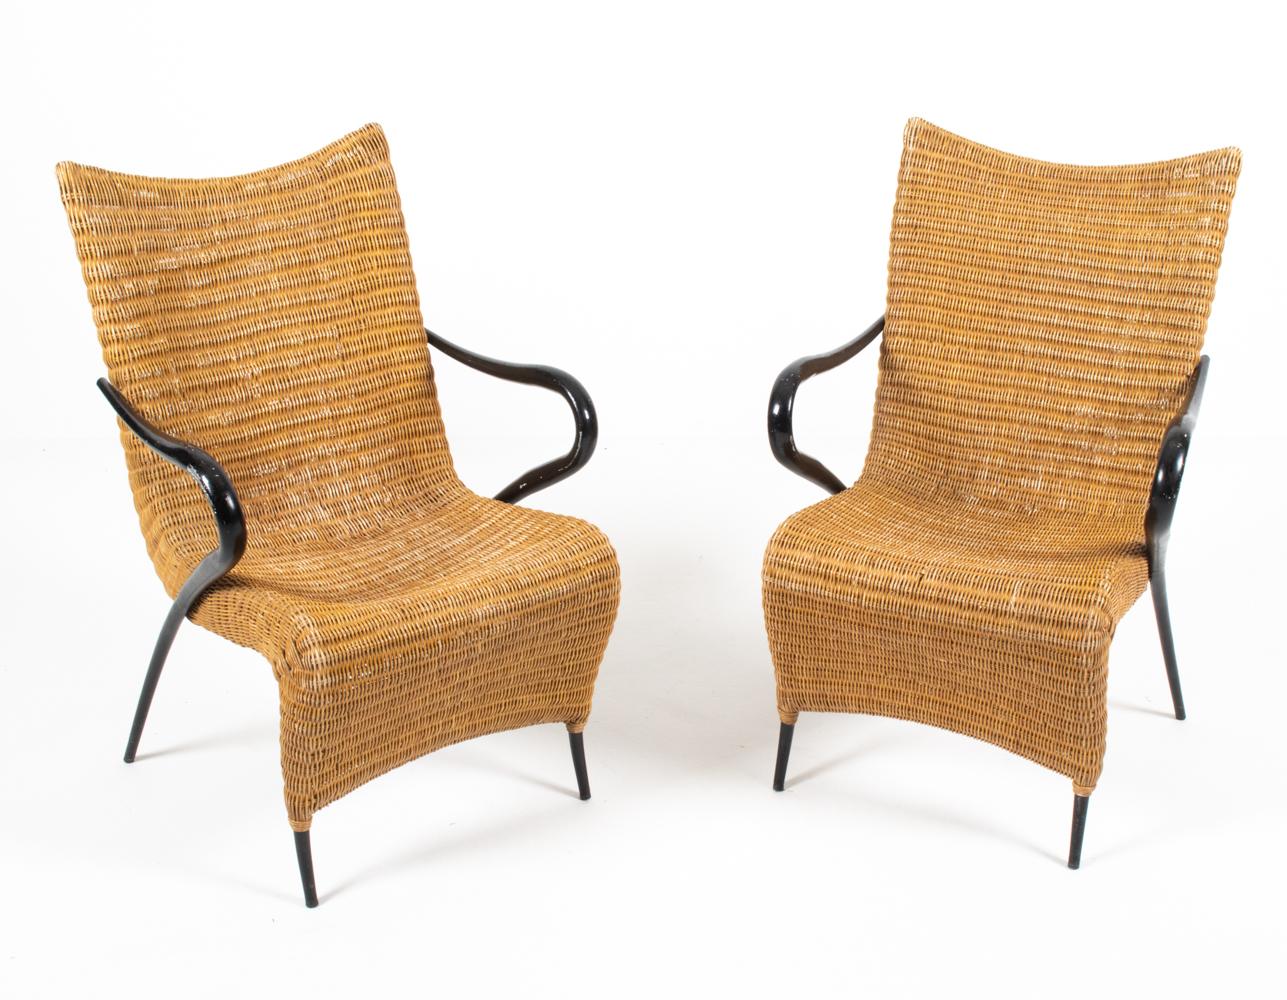 A rare and unusual pair of Danish modern easy chairs in sculpturally formed rattan with elegantly sloping arms in black paint finish. Designed by Soren Lund for Soren Lund Mobler, second half of the 20th century. These atomic age-influenced lounge